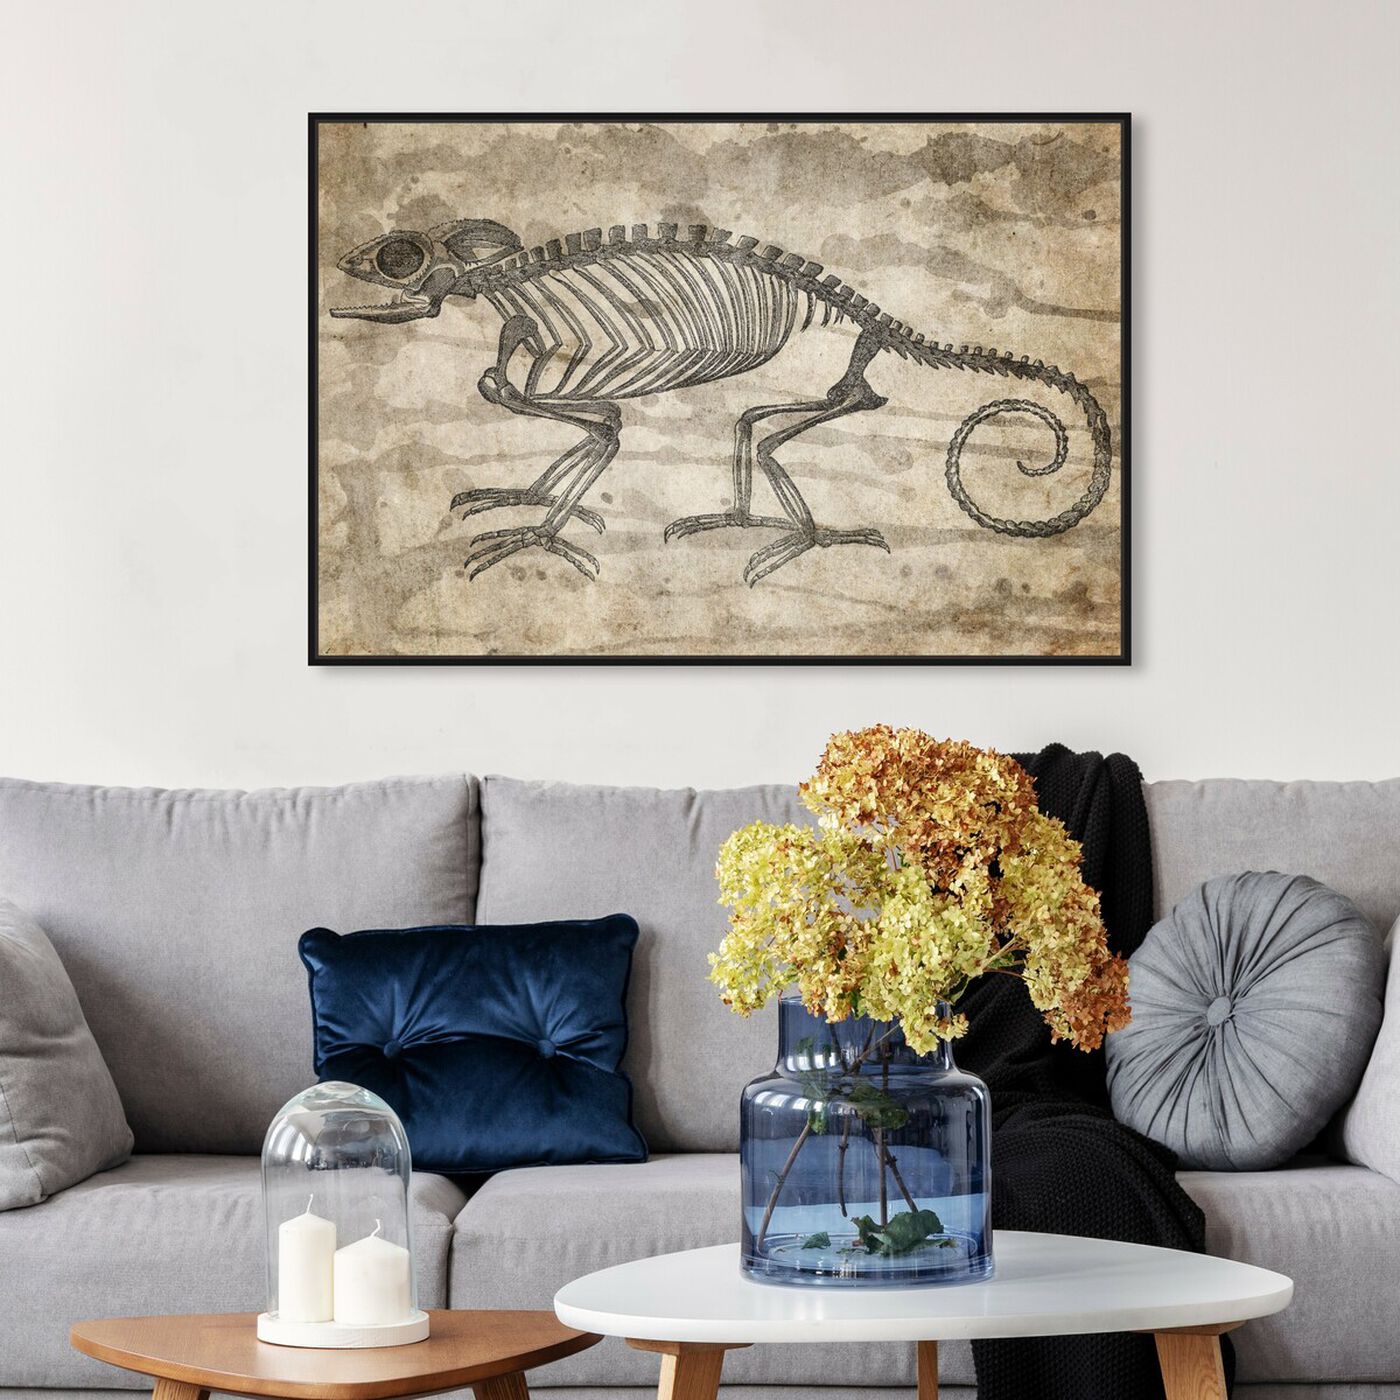 Hanging view of Karma Chameleon featuring animals and skeletons art.